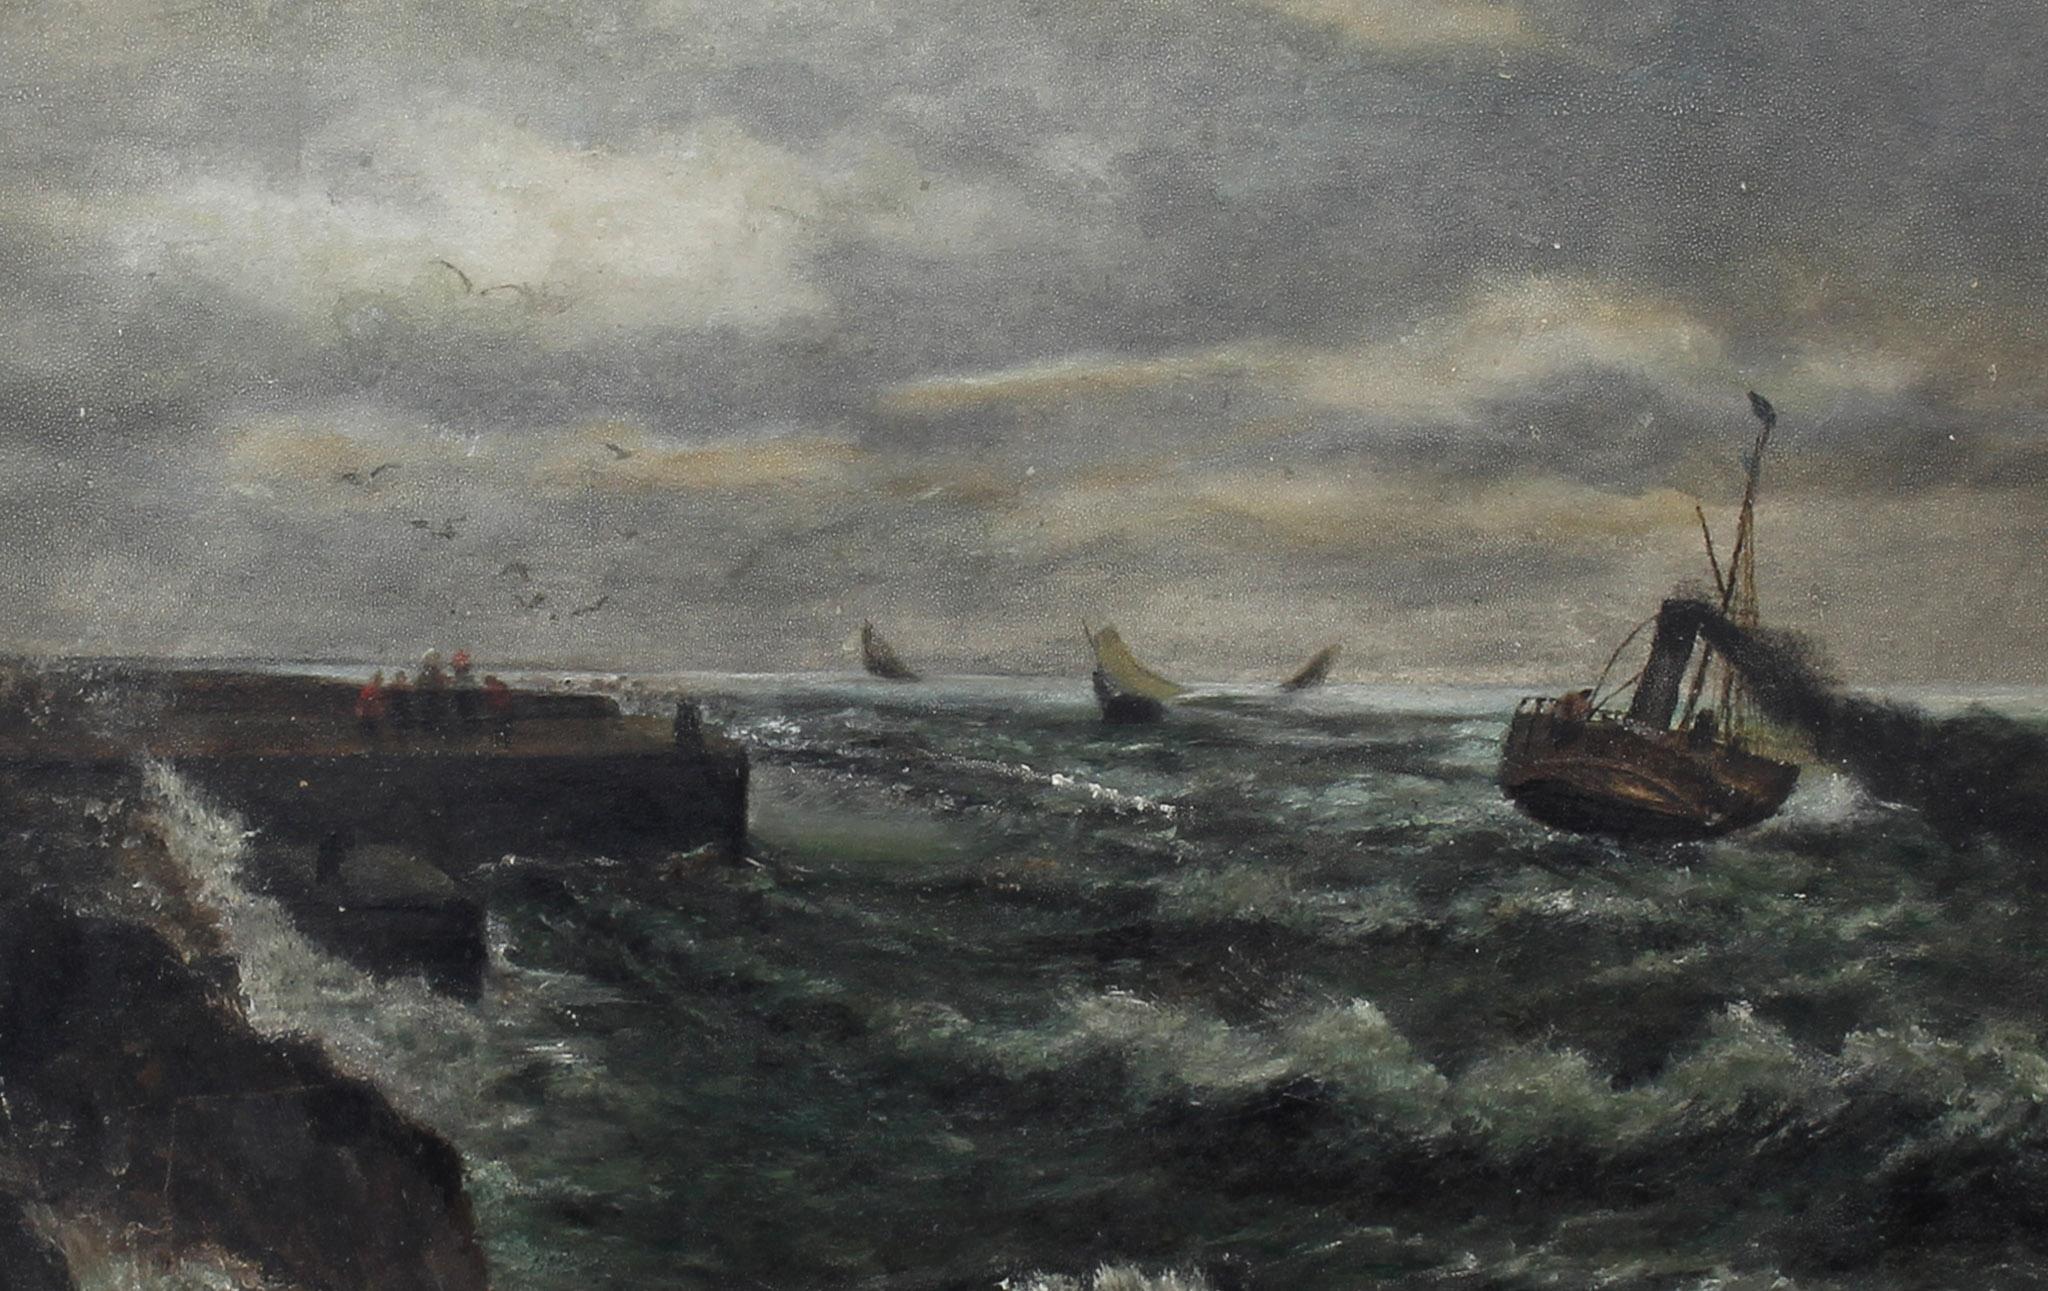 Stormy Day at Sea Tugboat Heading for Home - Realist Painting by Unknown